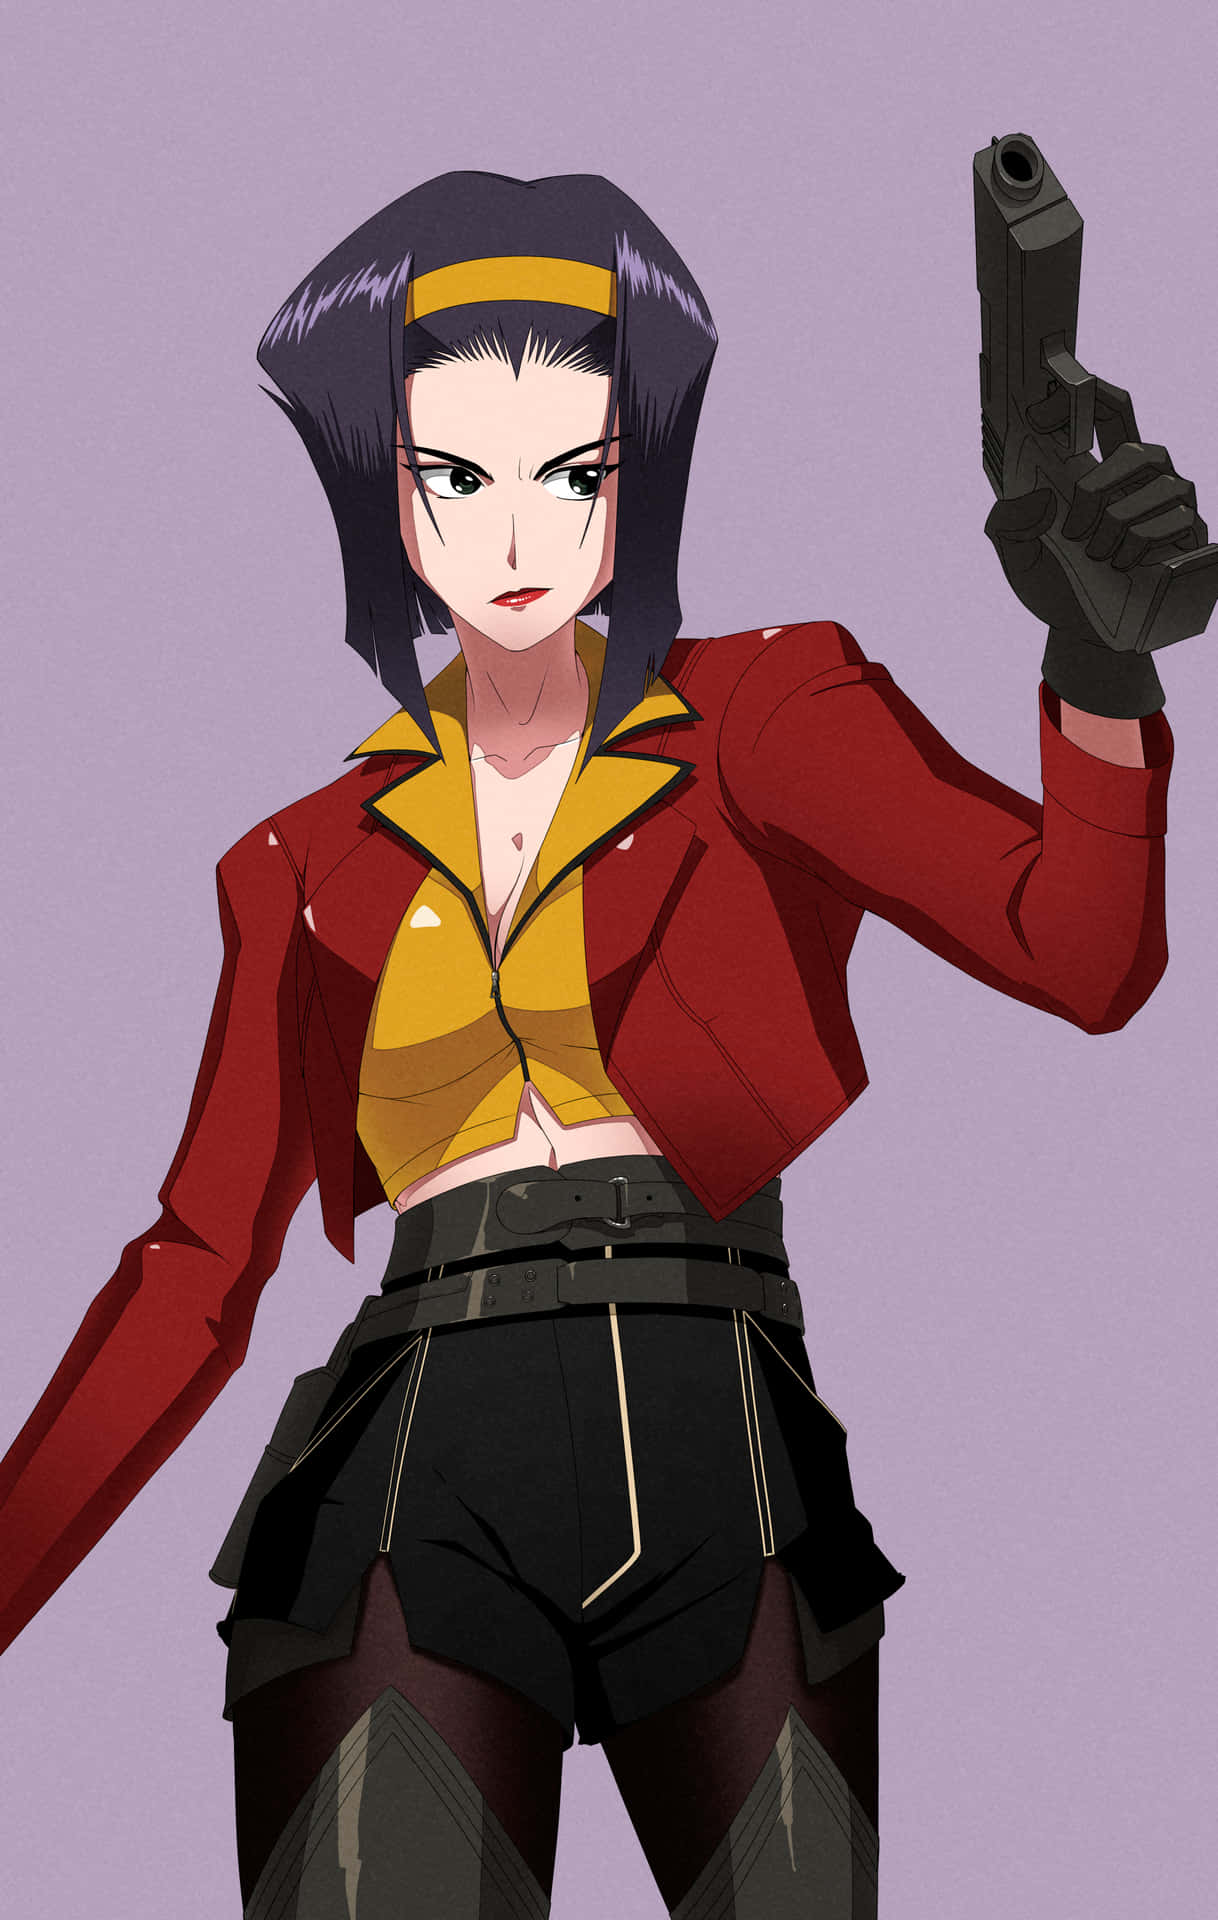 Faye Valentine, a confident and sultry anime character. Wallpaper